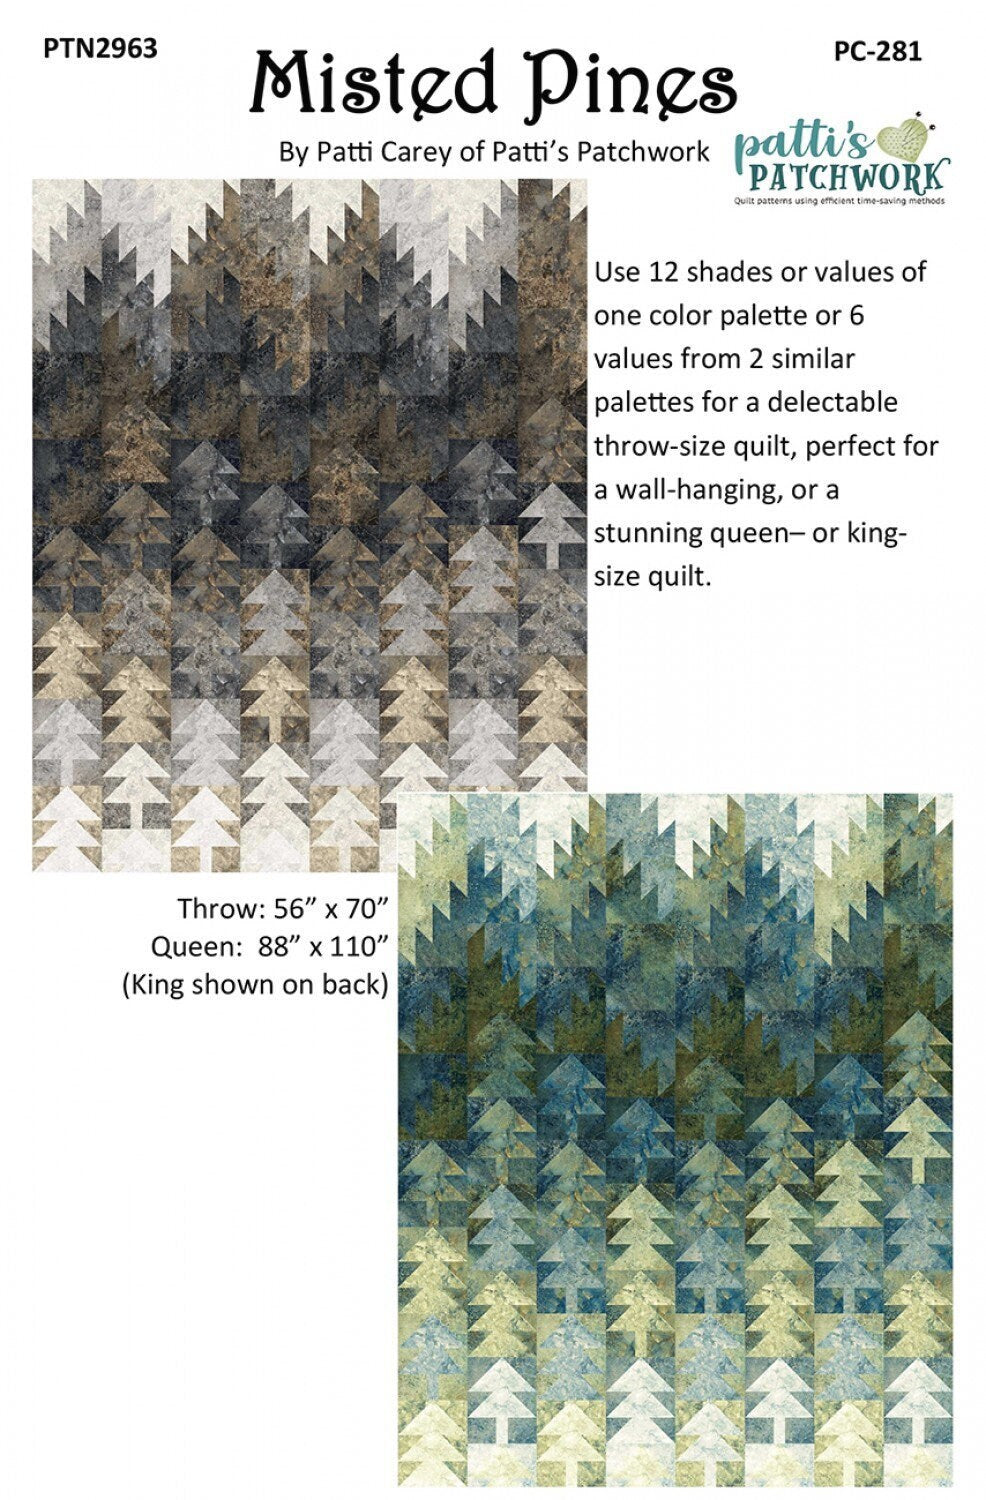 Misted Pines Quilt Pattern, Patti's Patchwork PC-281, Monochromatic Trees Mountains Quilt Pattern, Throw Queen King Quilt Pattern